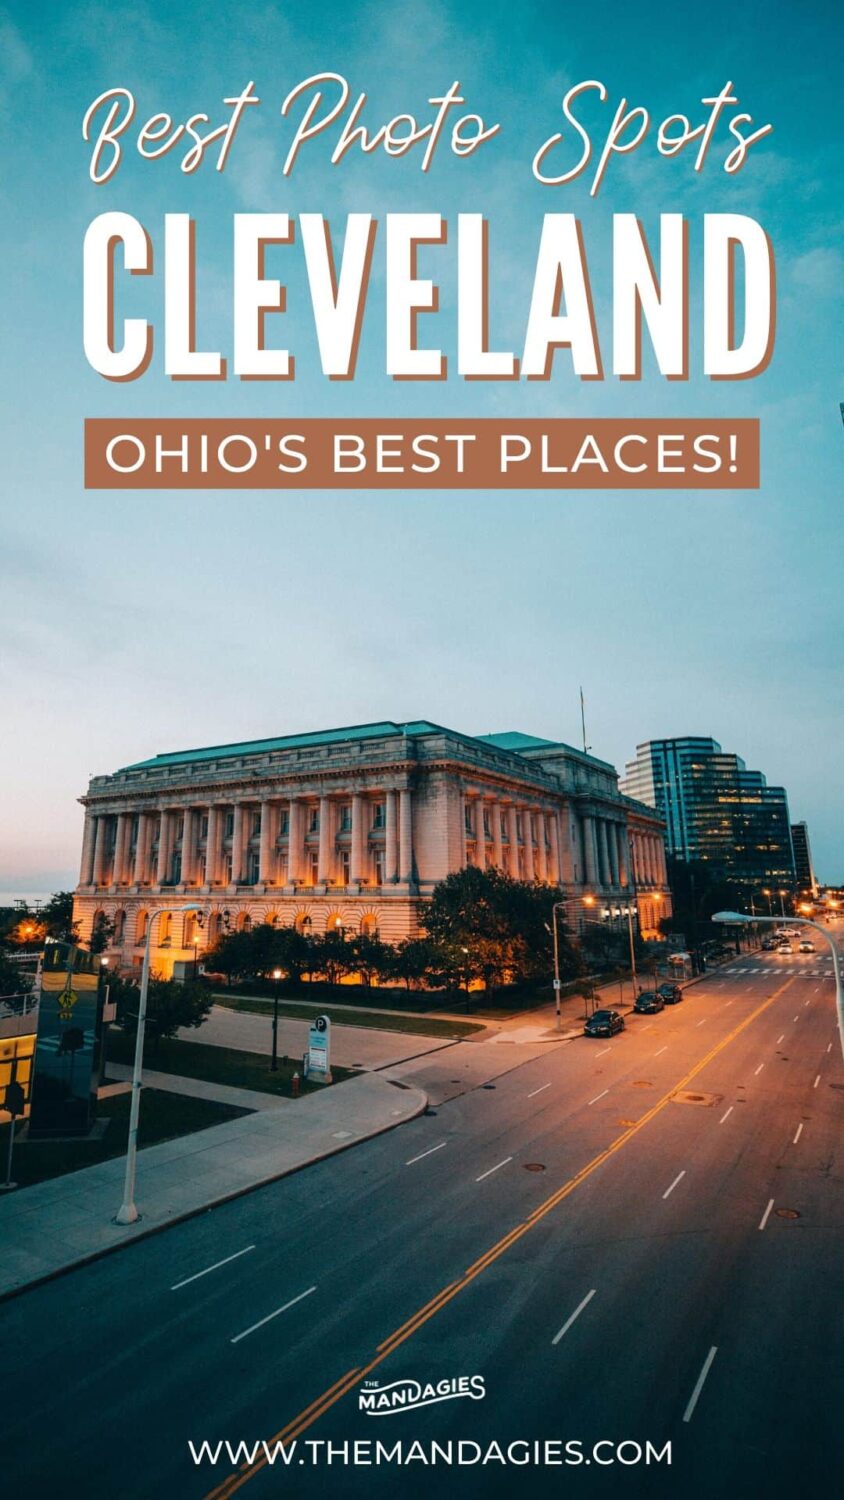 Traveling to Cleveland, Ohio, and want to know the best spots? Look no further than this post! We're sharing the best Instagram spots in Cleveland, which include historic places, unique restaurants, gorgeous nature, and so much more. Save this post for your net trip to the midwest! #cleveland #ohio #midwest #instagram #greatlakes #photography #cuyahogavalley #nature